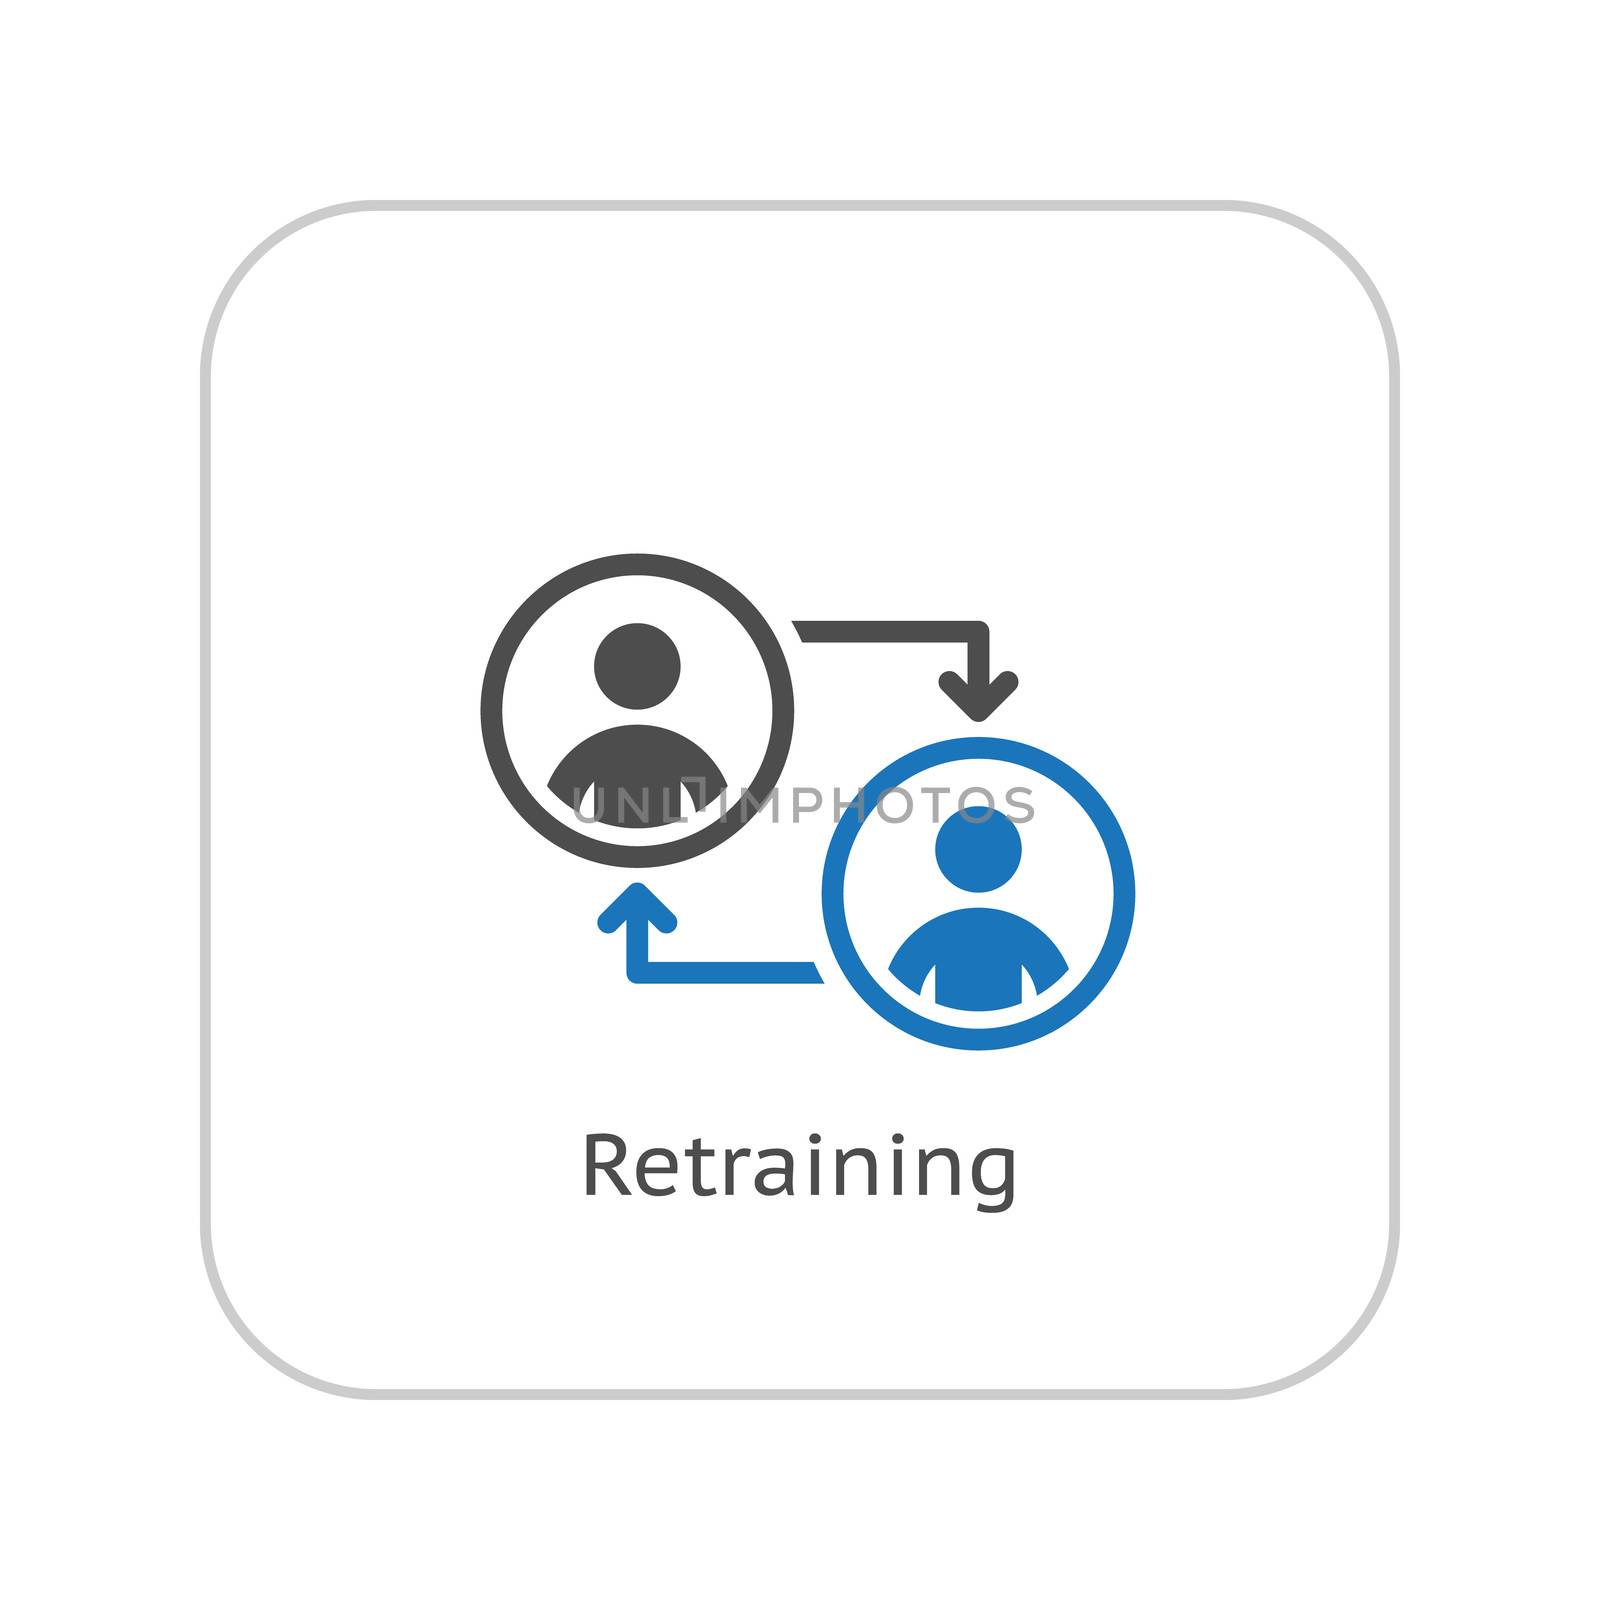 Retraining Icon. Business Concept. Flat Design. by WaD